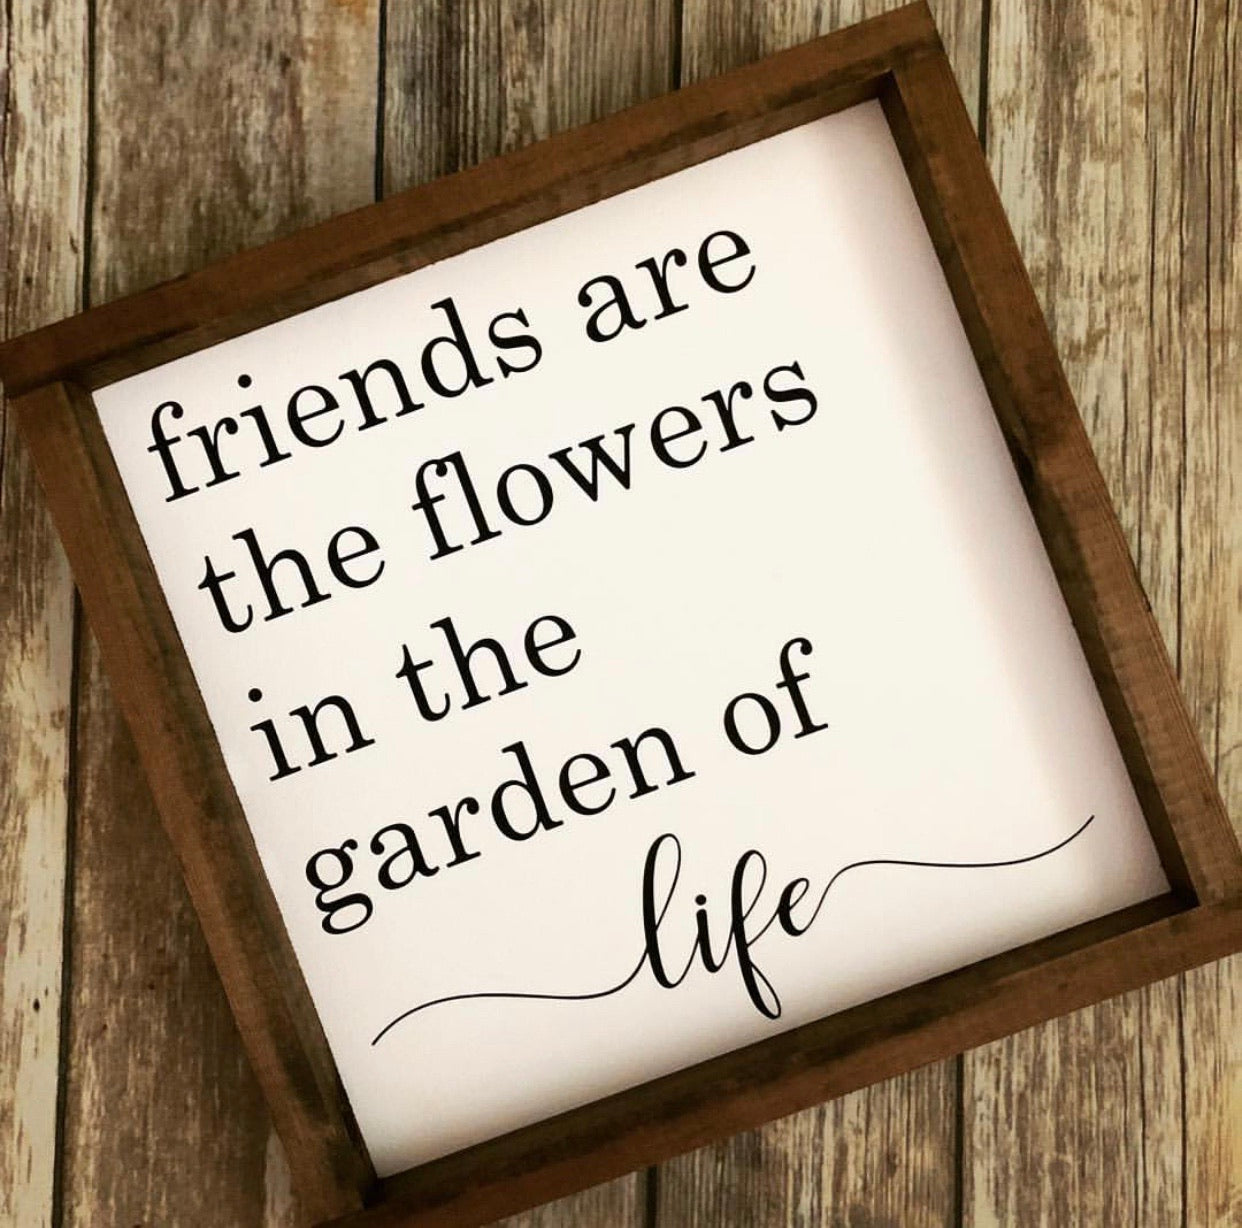 Friends are flowers